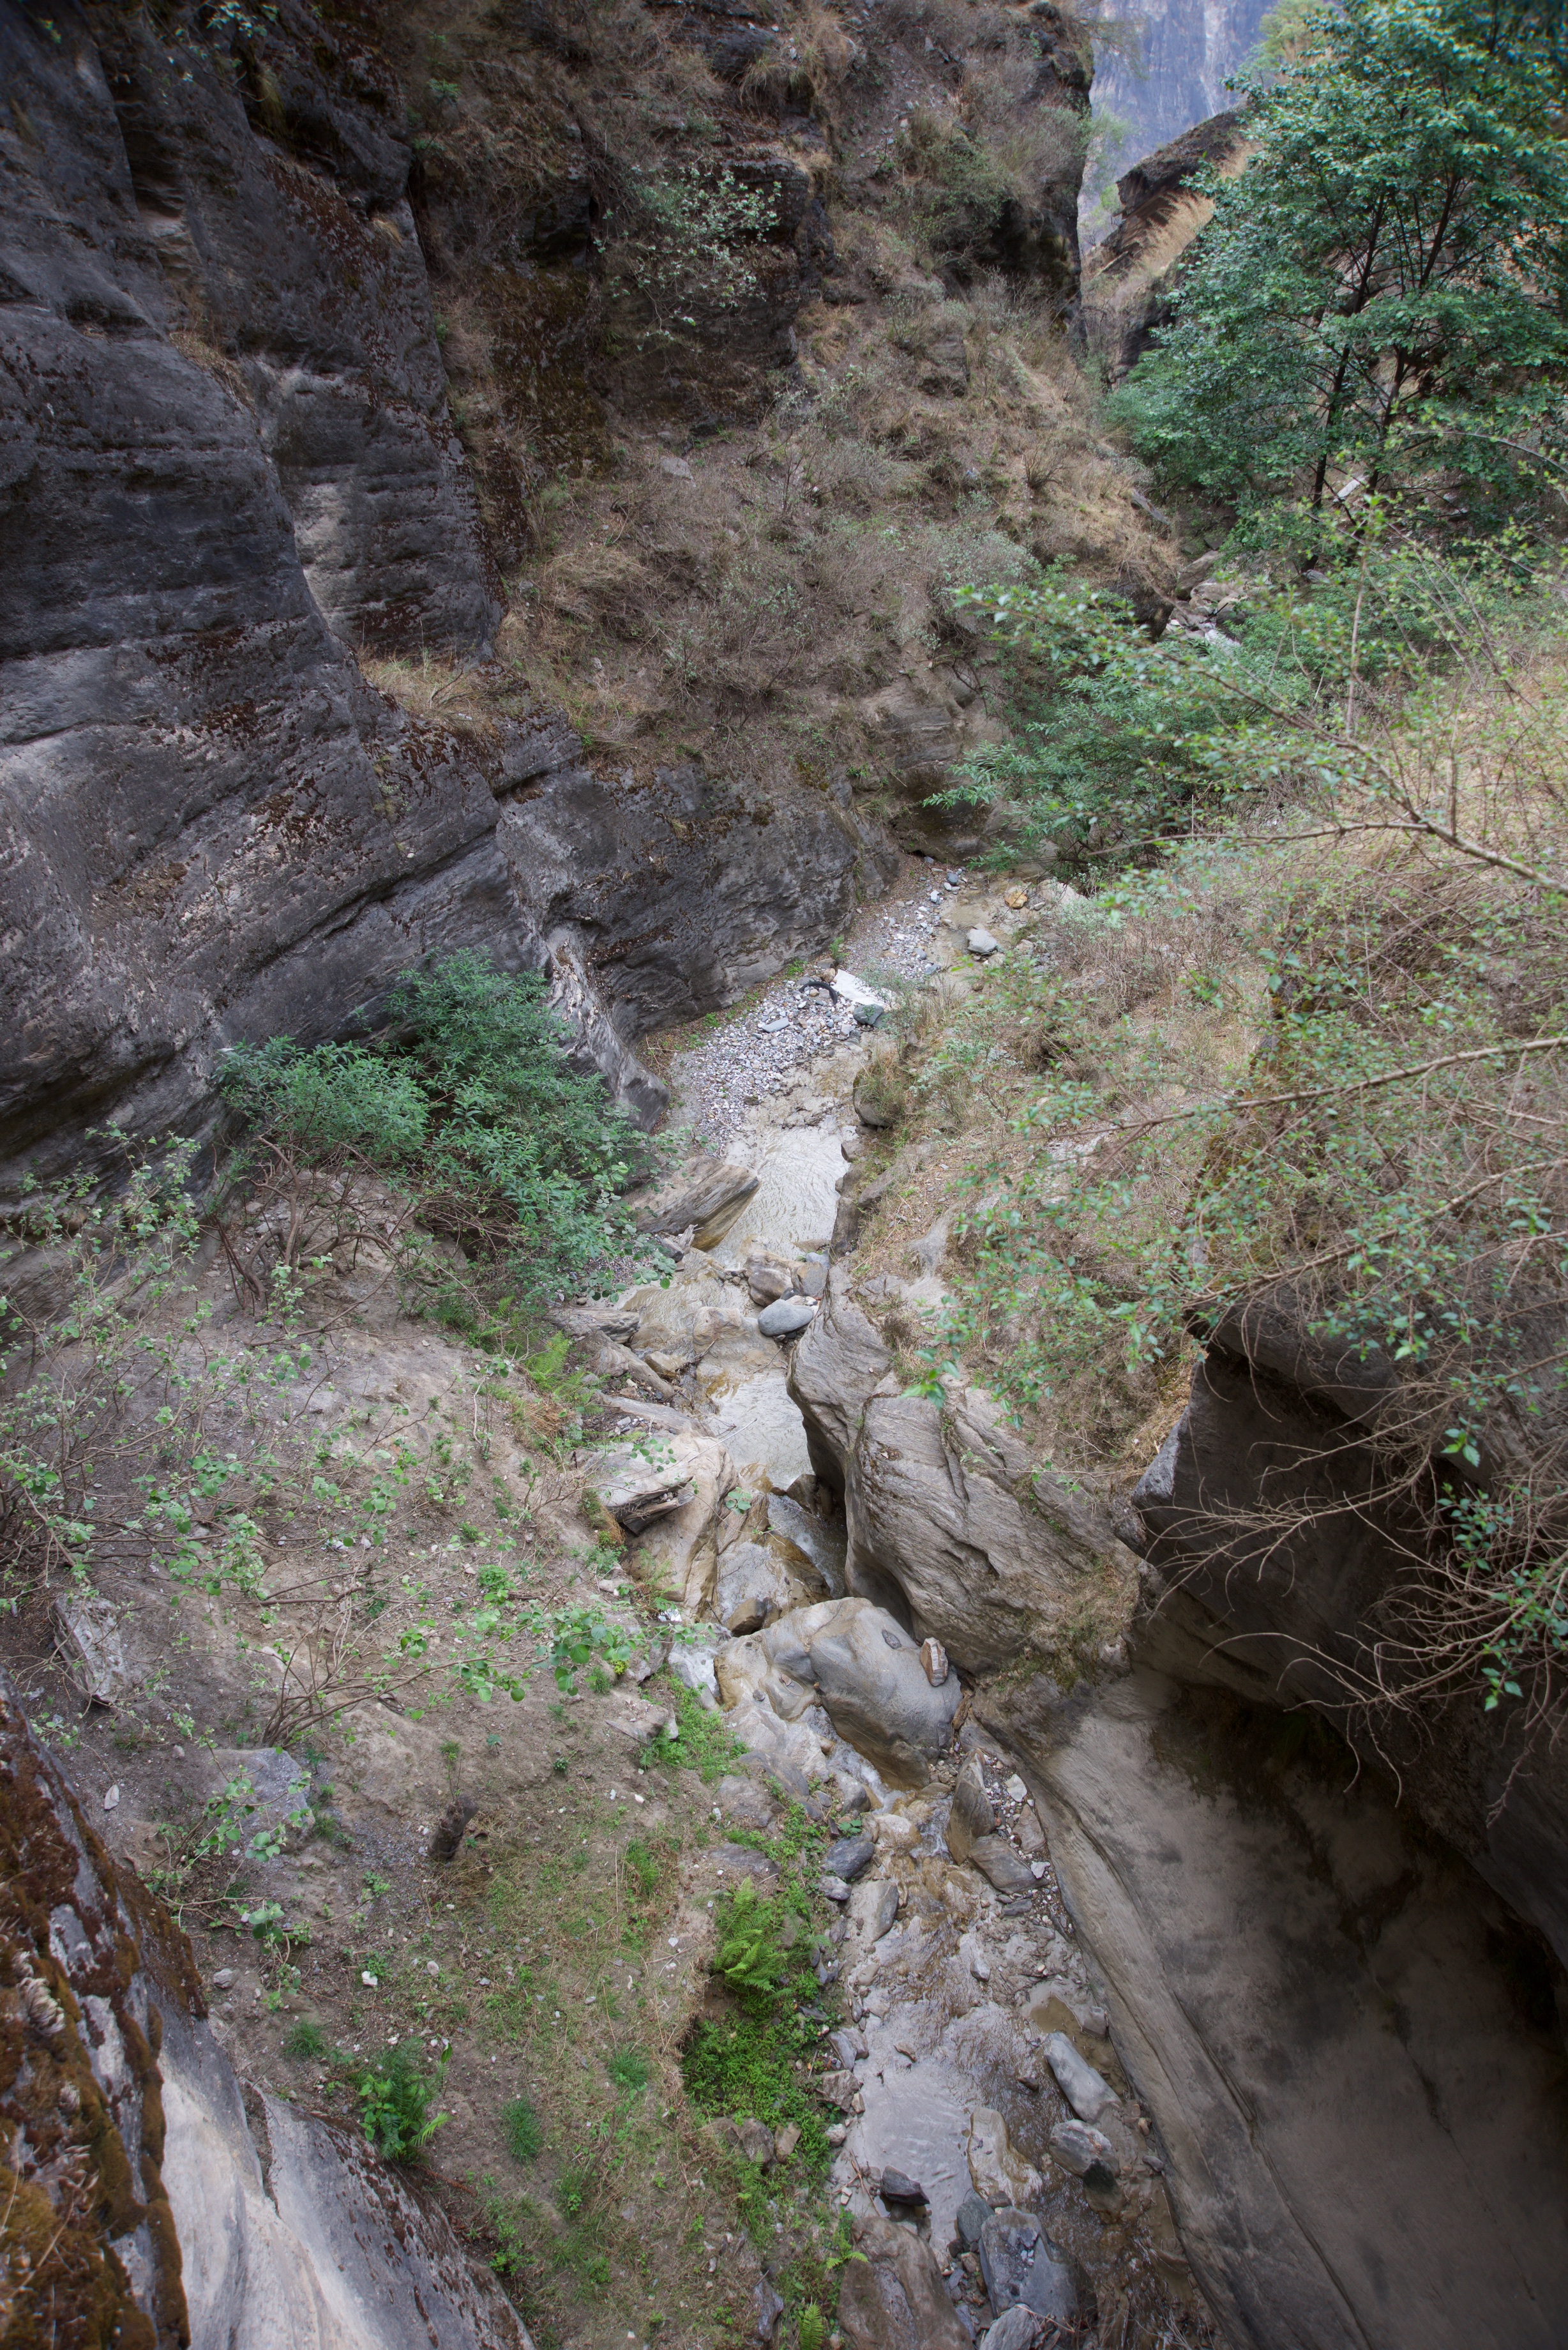 View #18, Tiger Leaping Gorge track, China, 19 Jun 2015.jpg